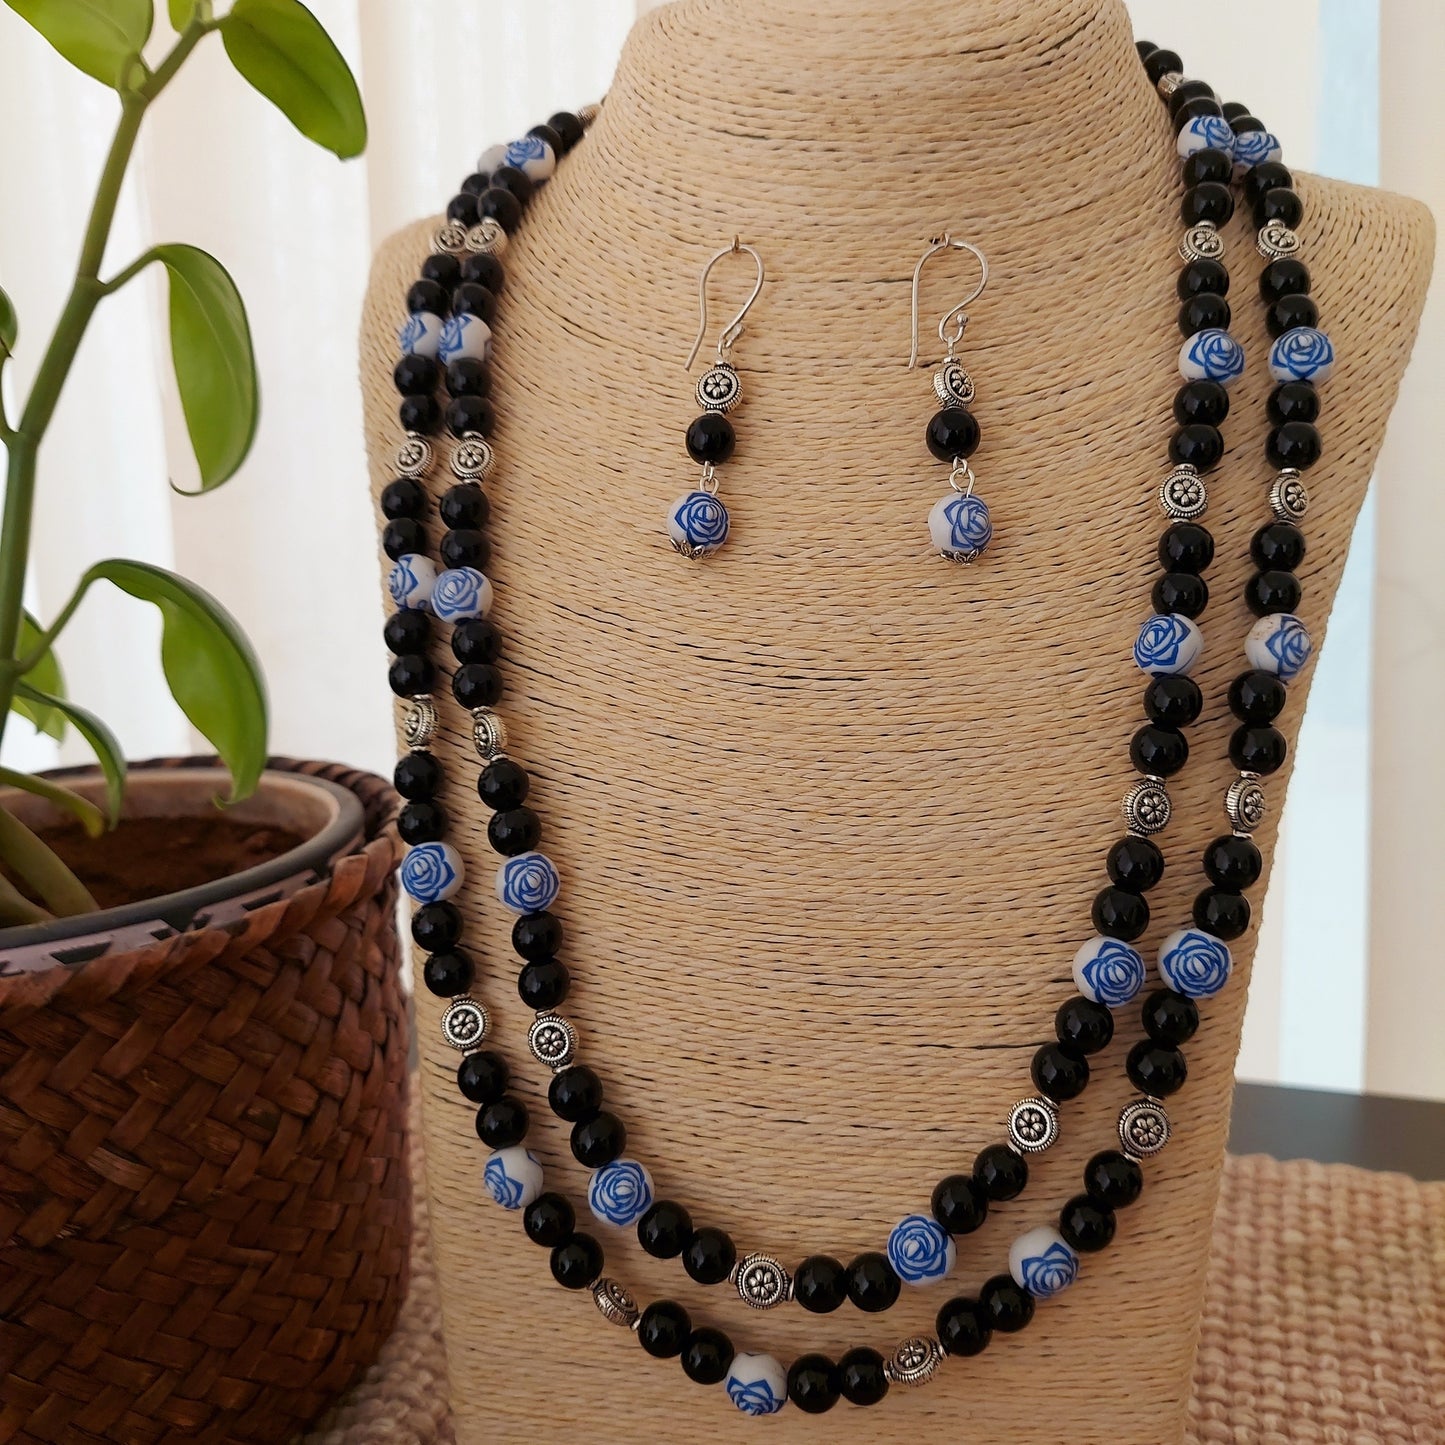 Double Layered Black Beaded Neckset with Floral Beads and Silver Accents